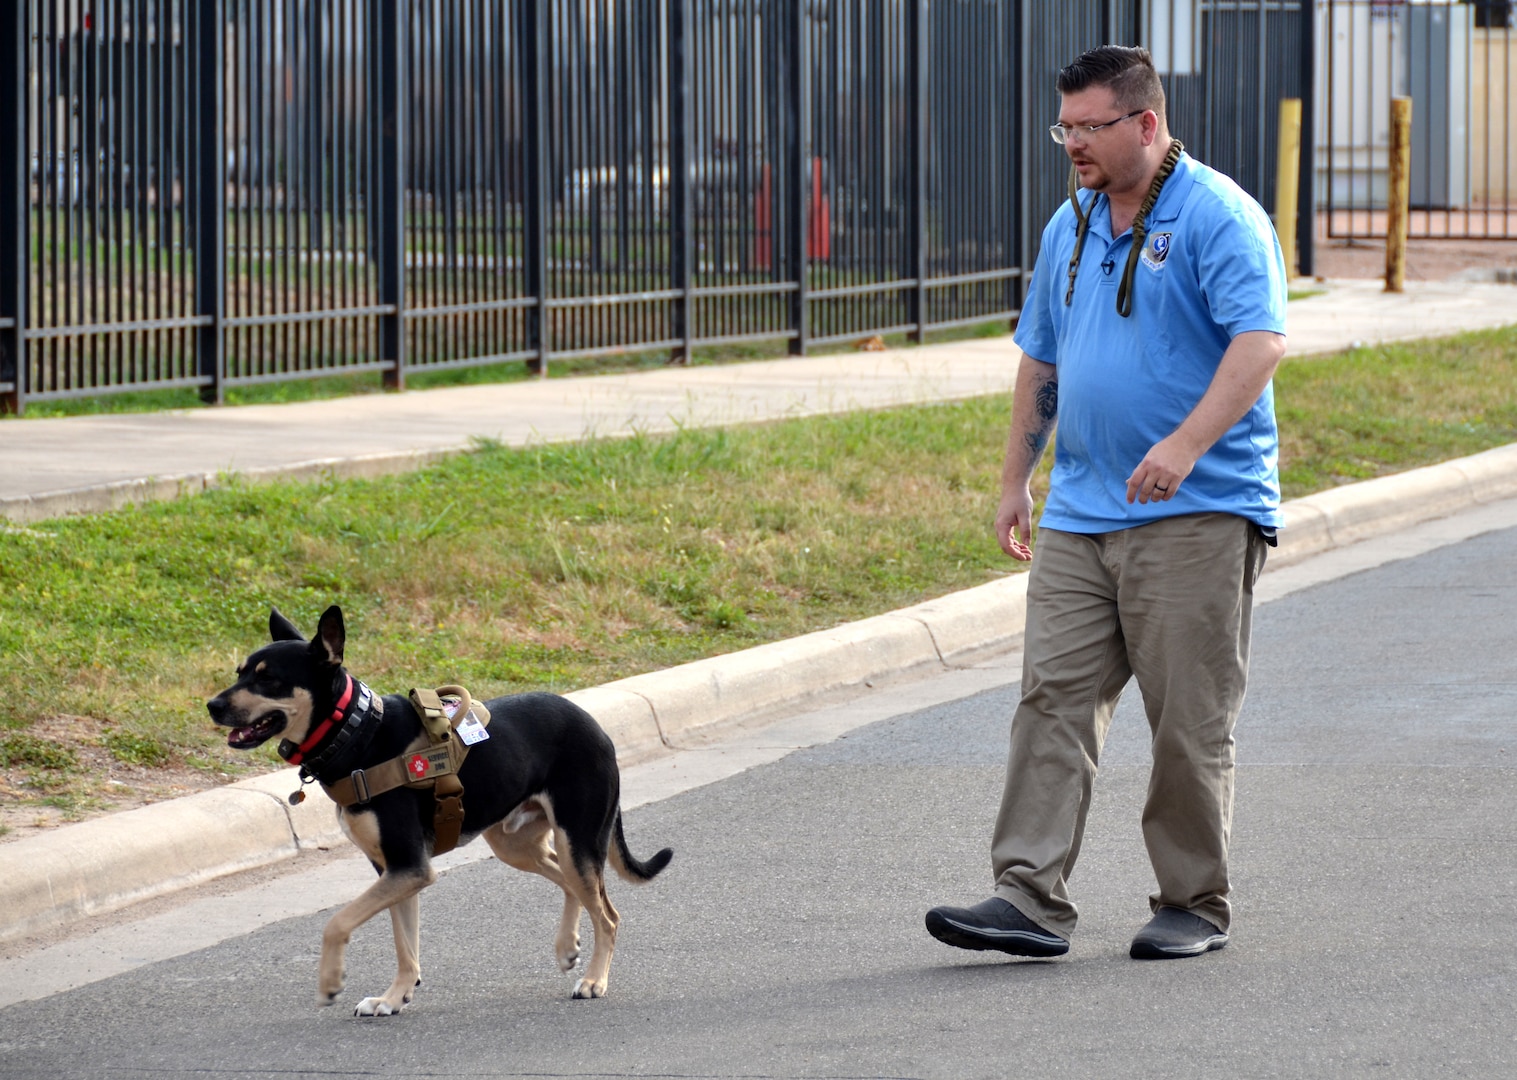 Ryan Kaono, a support agreement manager with the Air Force Installation and Mission Support Center, takes his service dog Romeo for a walk around the building. Romeo helps Kaono quickly recover from bouts of anxiety and night terrors related to enemy attacks while he was deployed to Saudi Arabia and Iraq.